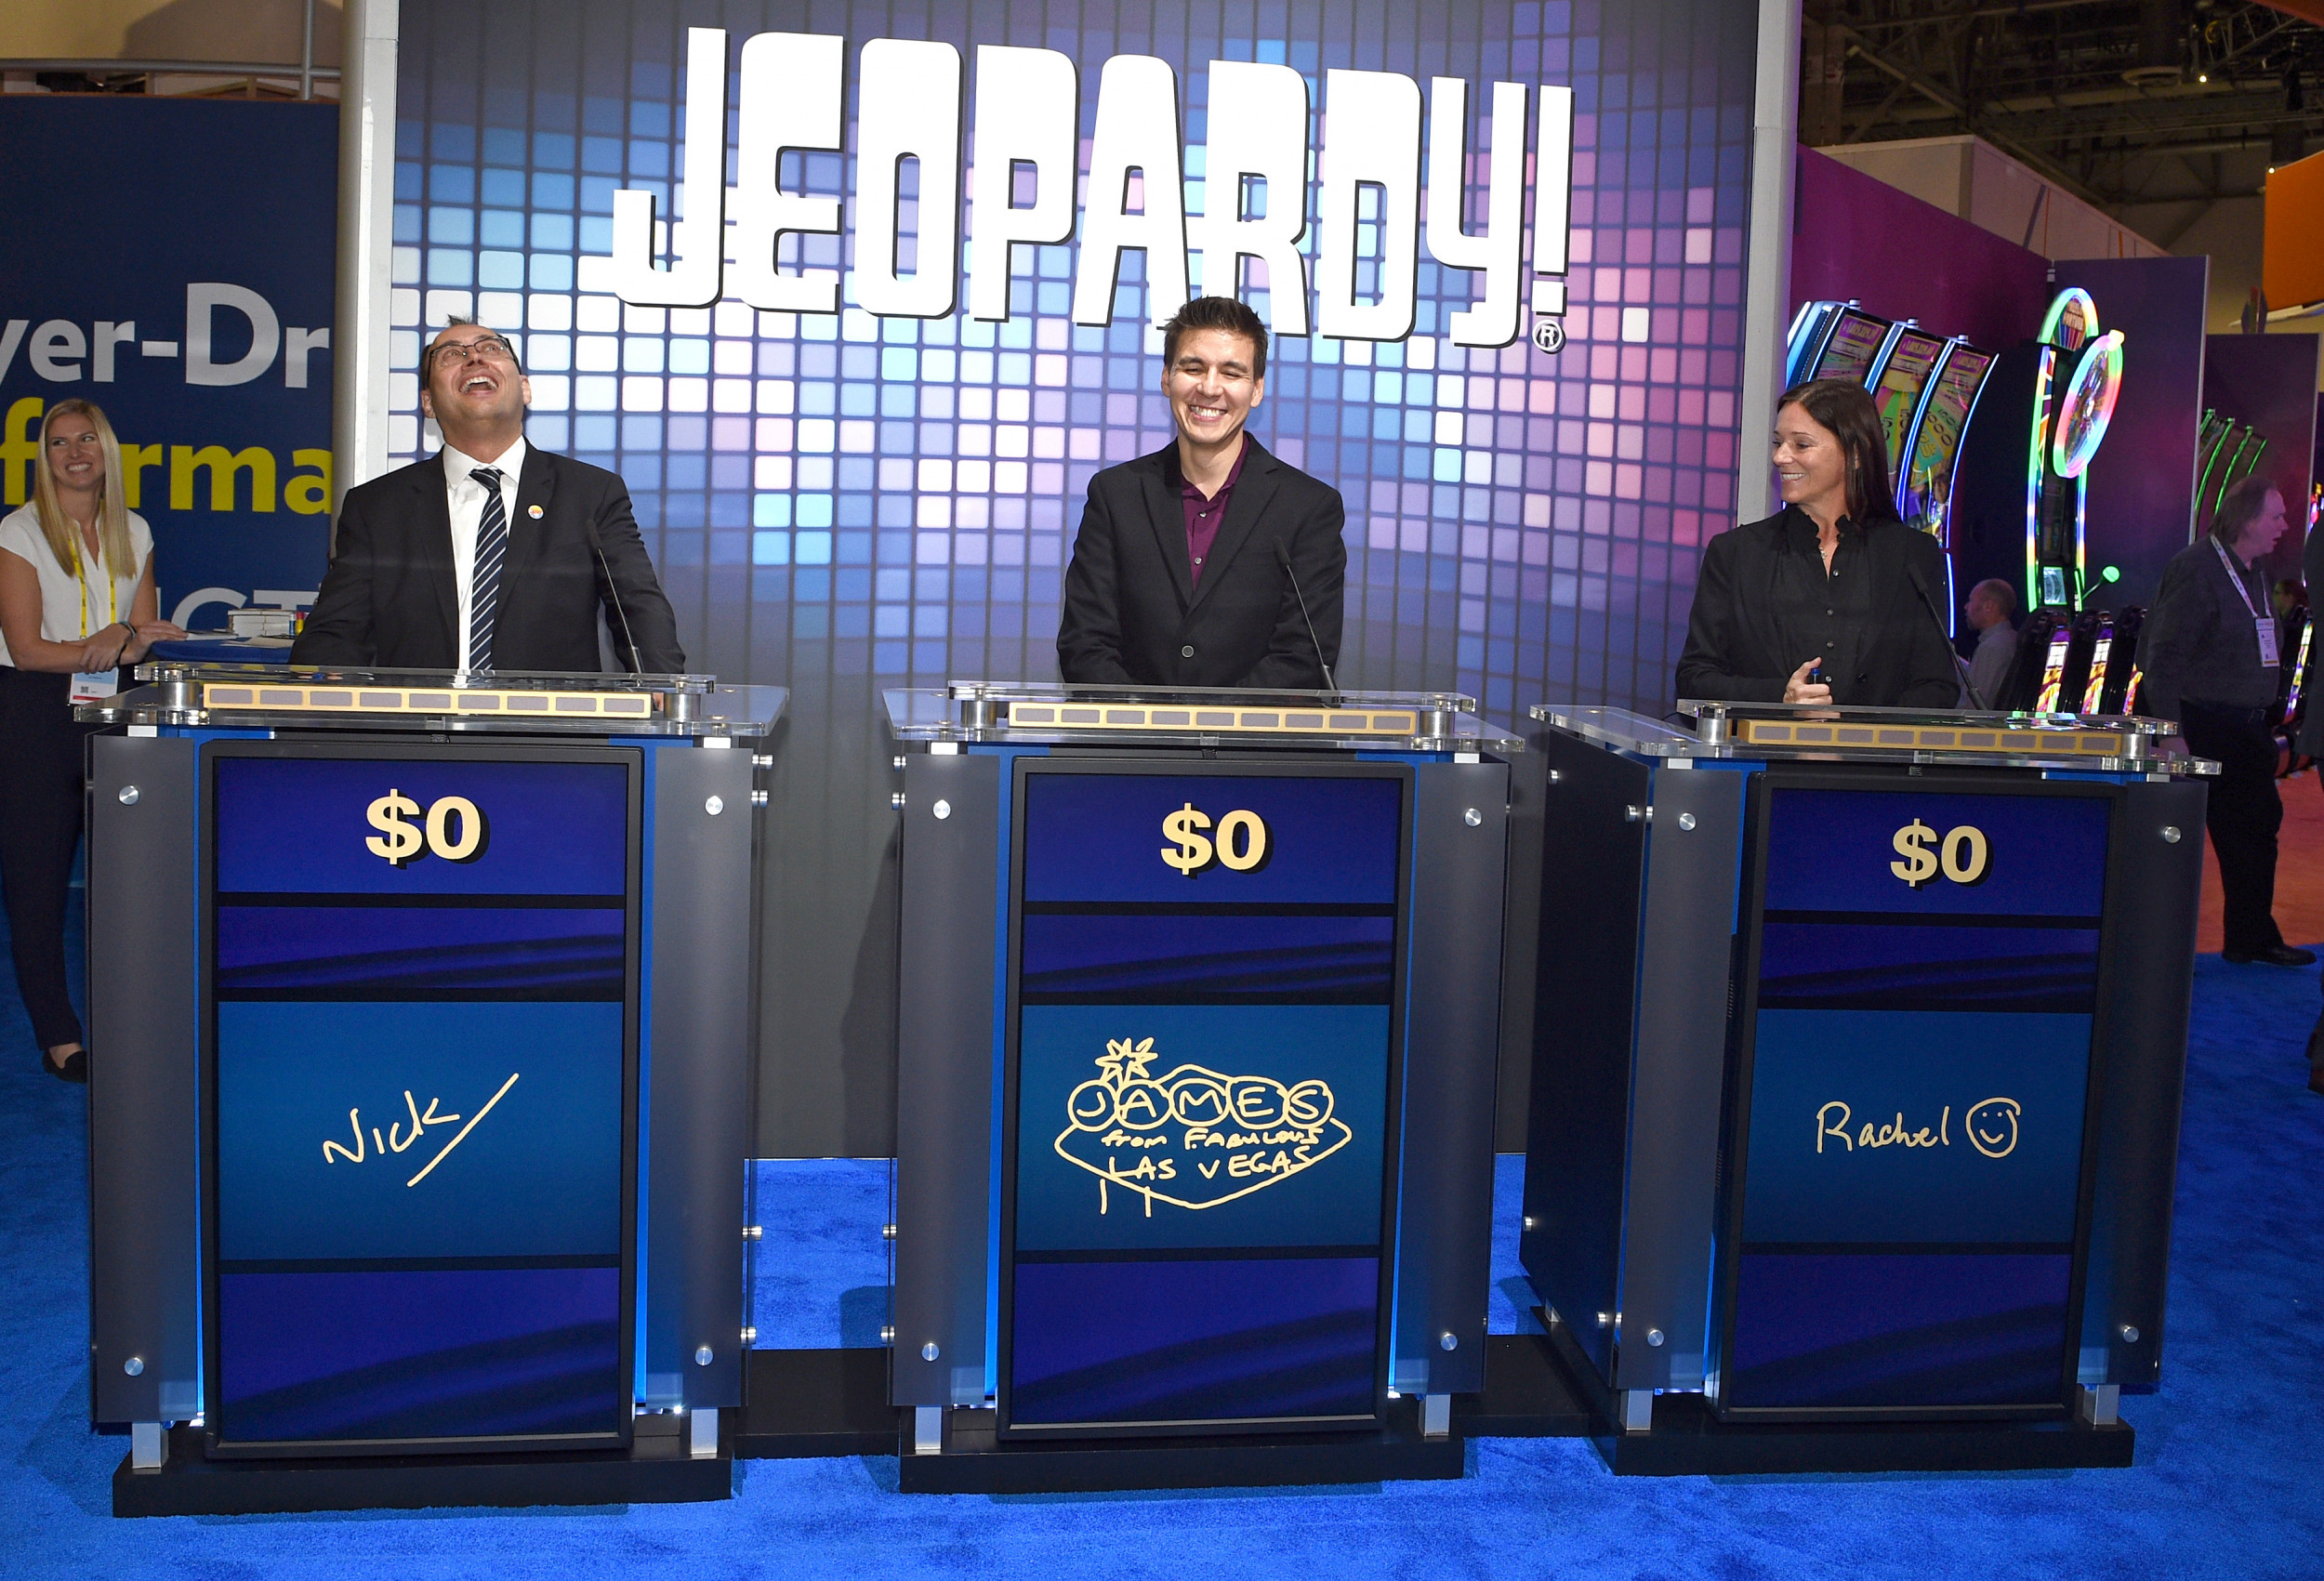 How to Watch 'Jeopardy!' Champions James Holzhauer, Ken